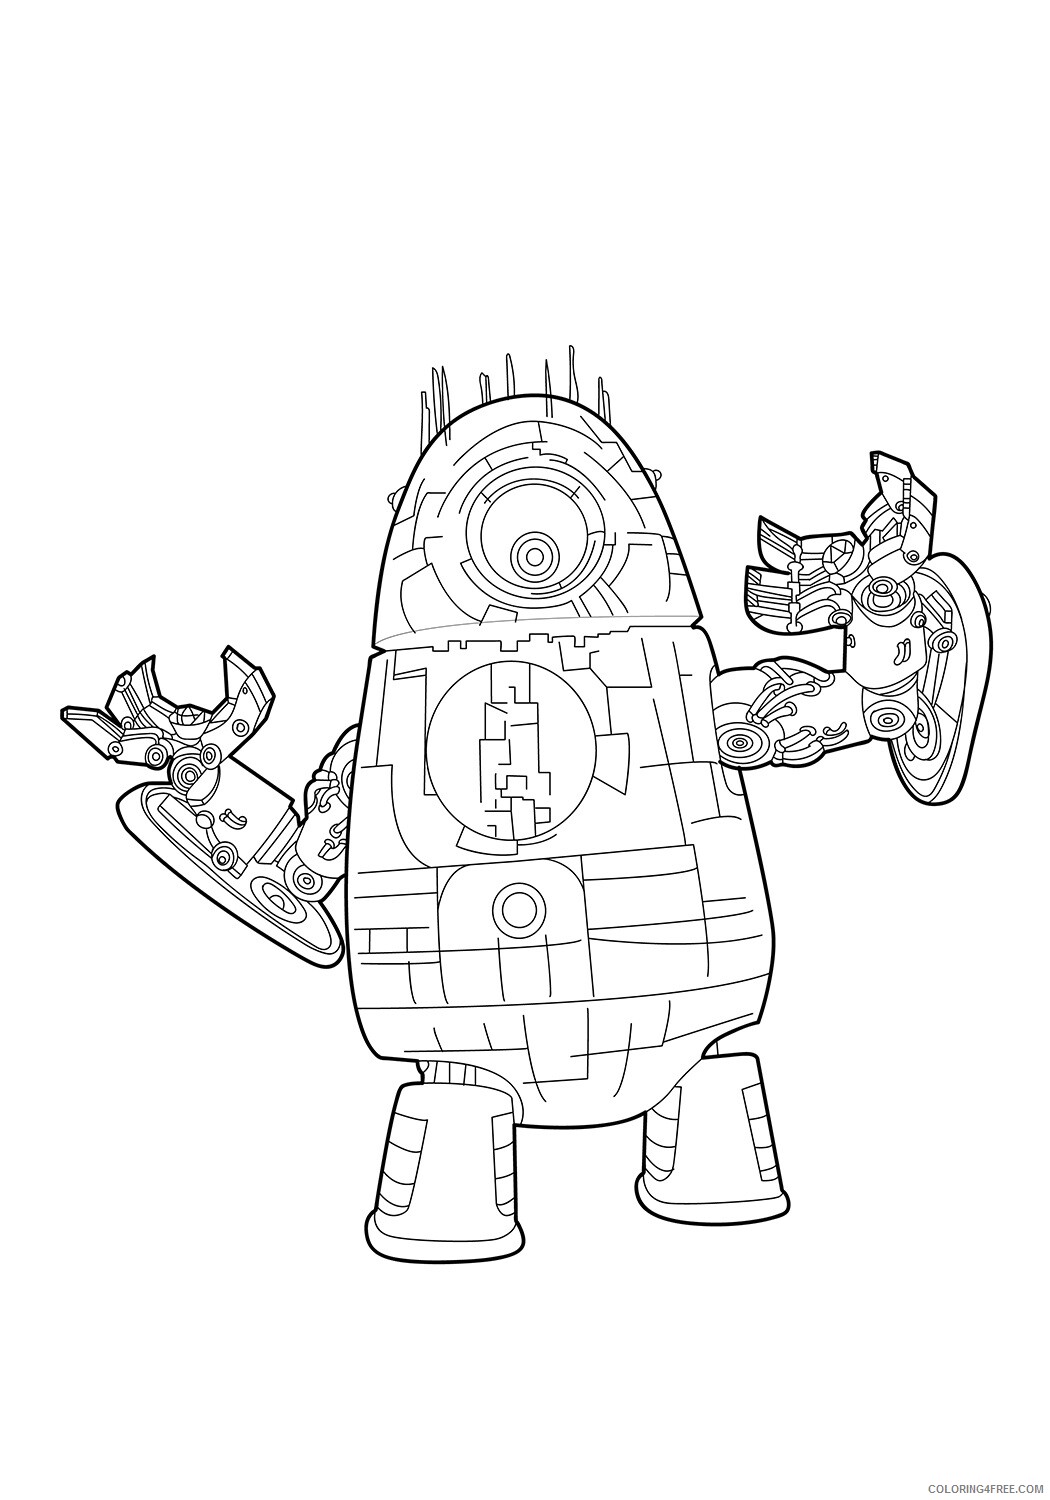 Alien Coloring Pages 1526823060_alien robot 16 a4 Printable 2021 0118 Coloring4free